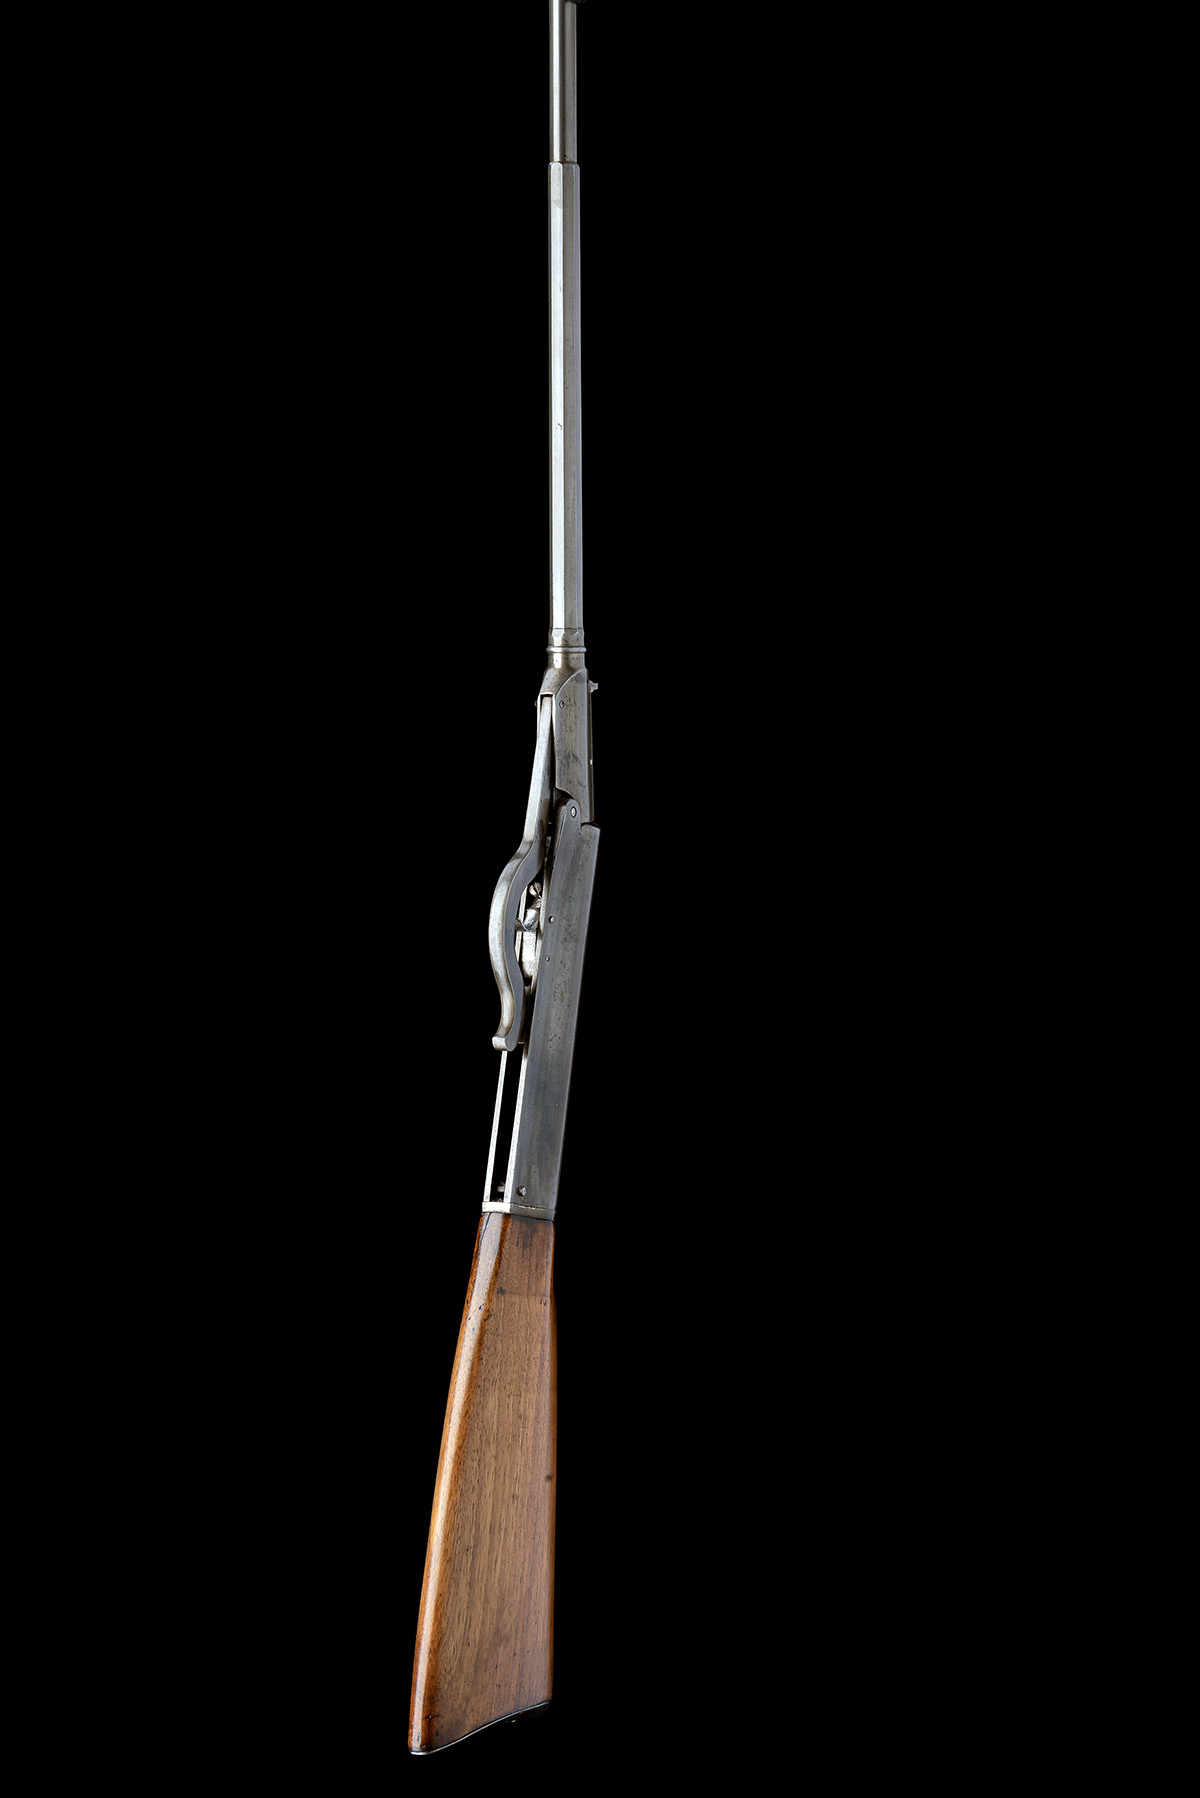 A COLLECTION OF FIVE RESTORED .177 GEM-STYLE AIR-RIFLES, serial numbers 73255, 39702, 91722, 66777 - Image 18 of 36